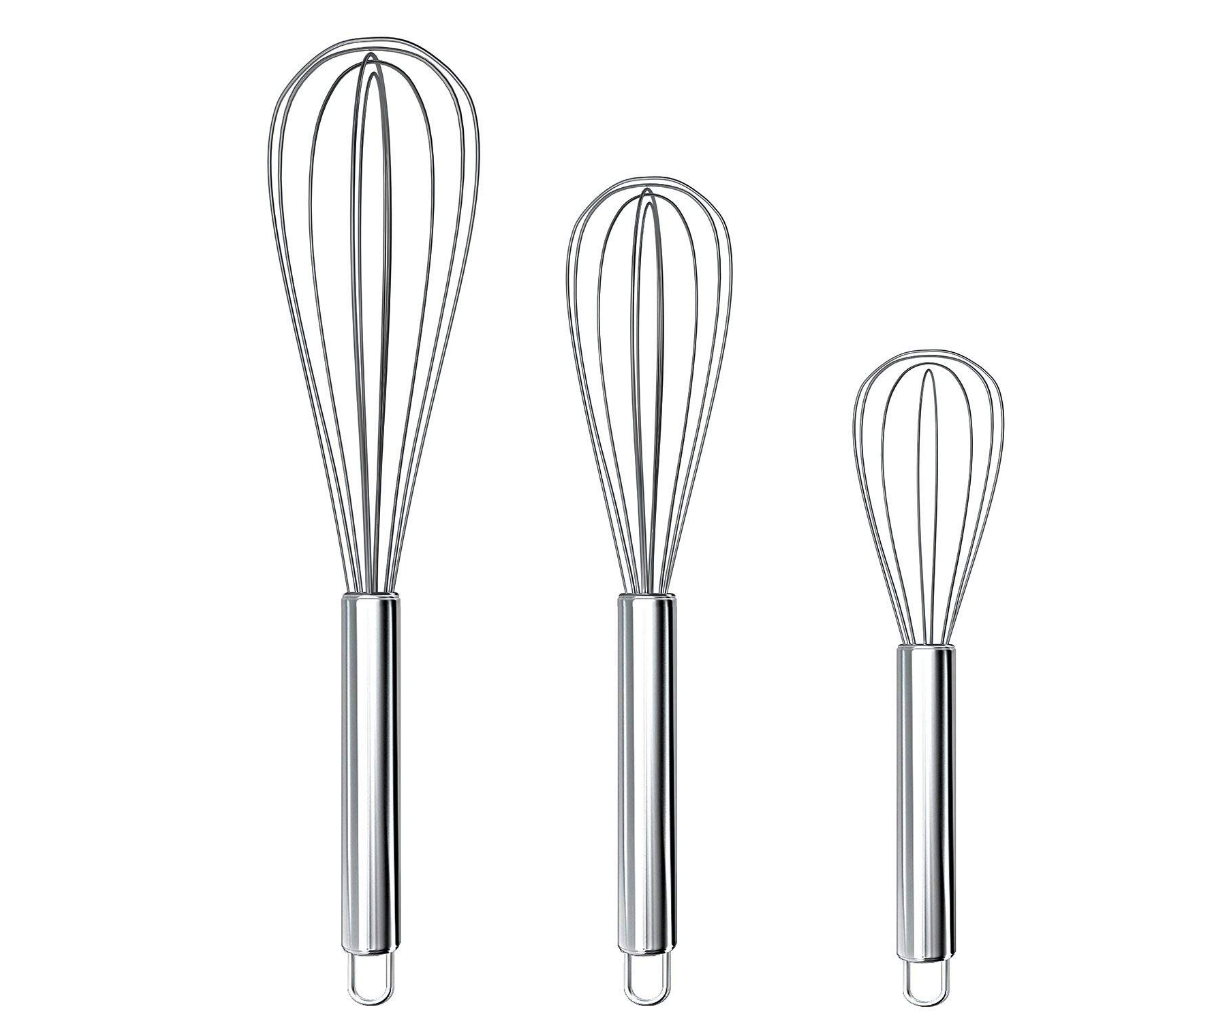 Copy of Set of 3 Stainless Steel Whisk 8"+10"+12", Kitchen Balloon Hand Stainless Whisk Set for Blending Whisking Beating Stirring by Ouddy